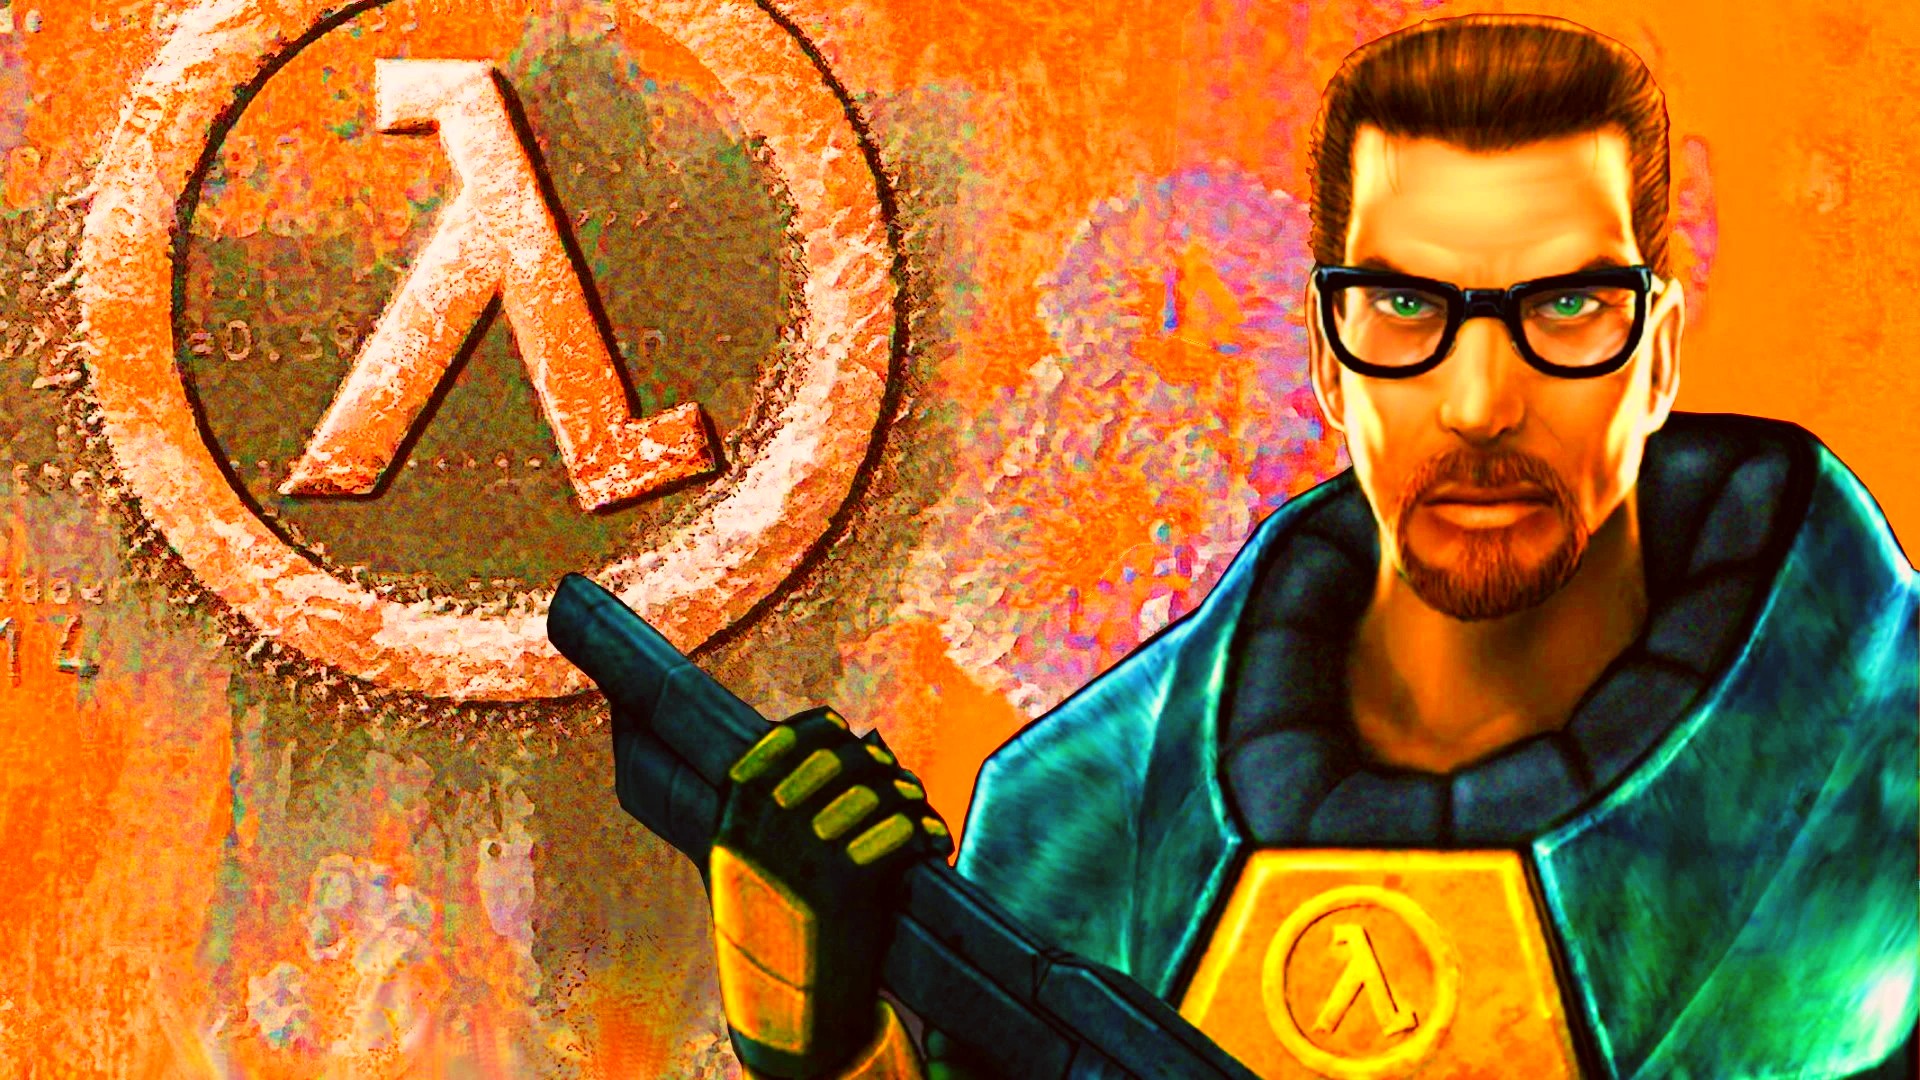 All Half-Life games are now free to play on Steam for a limited